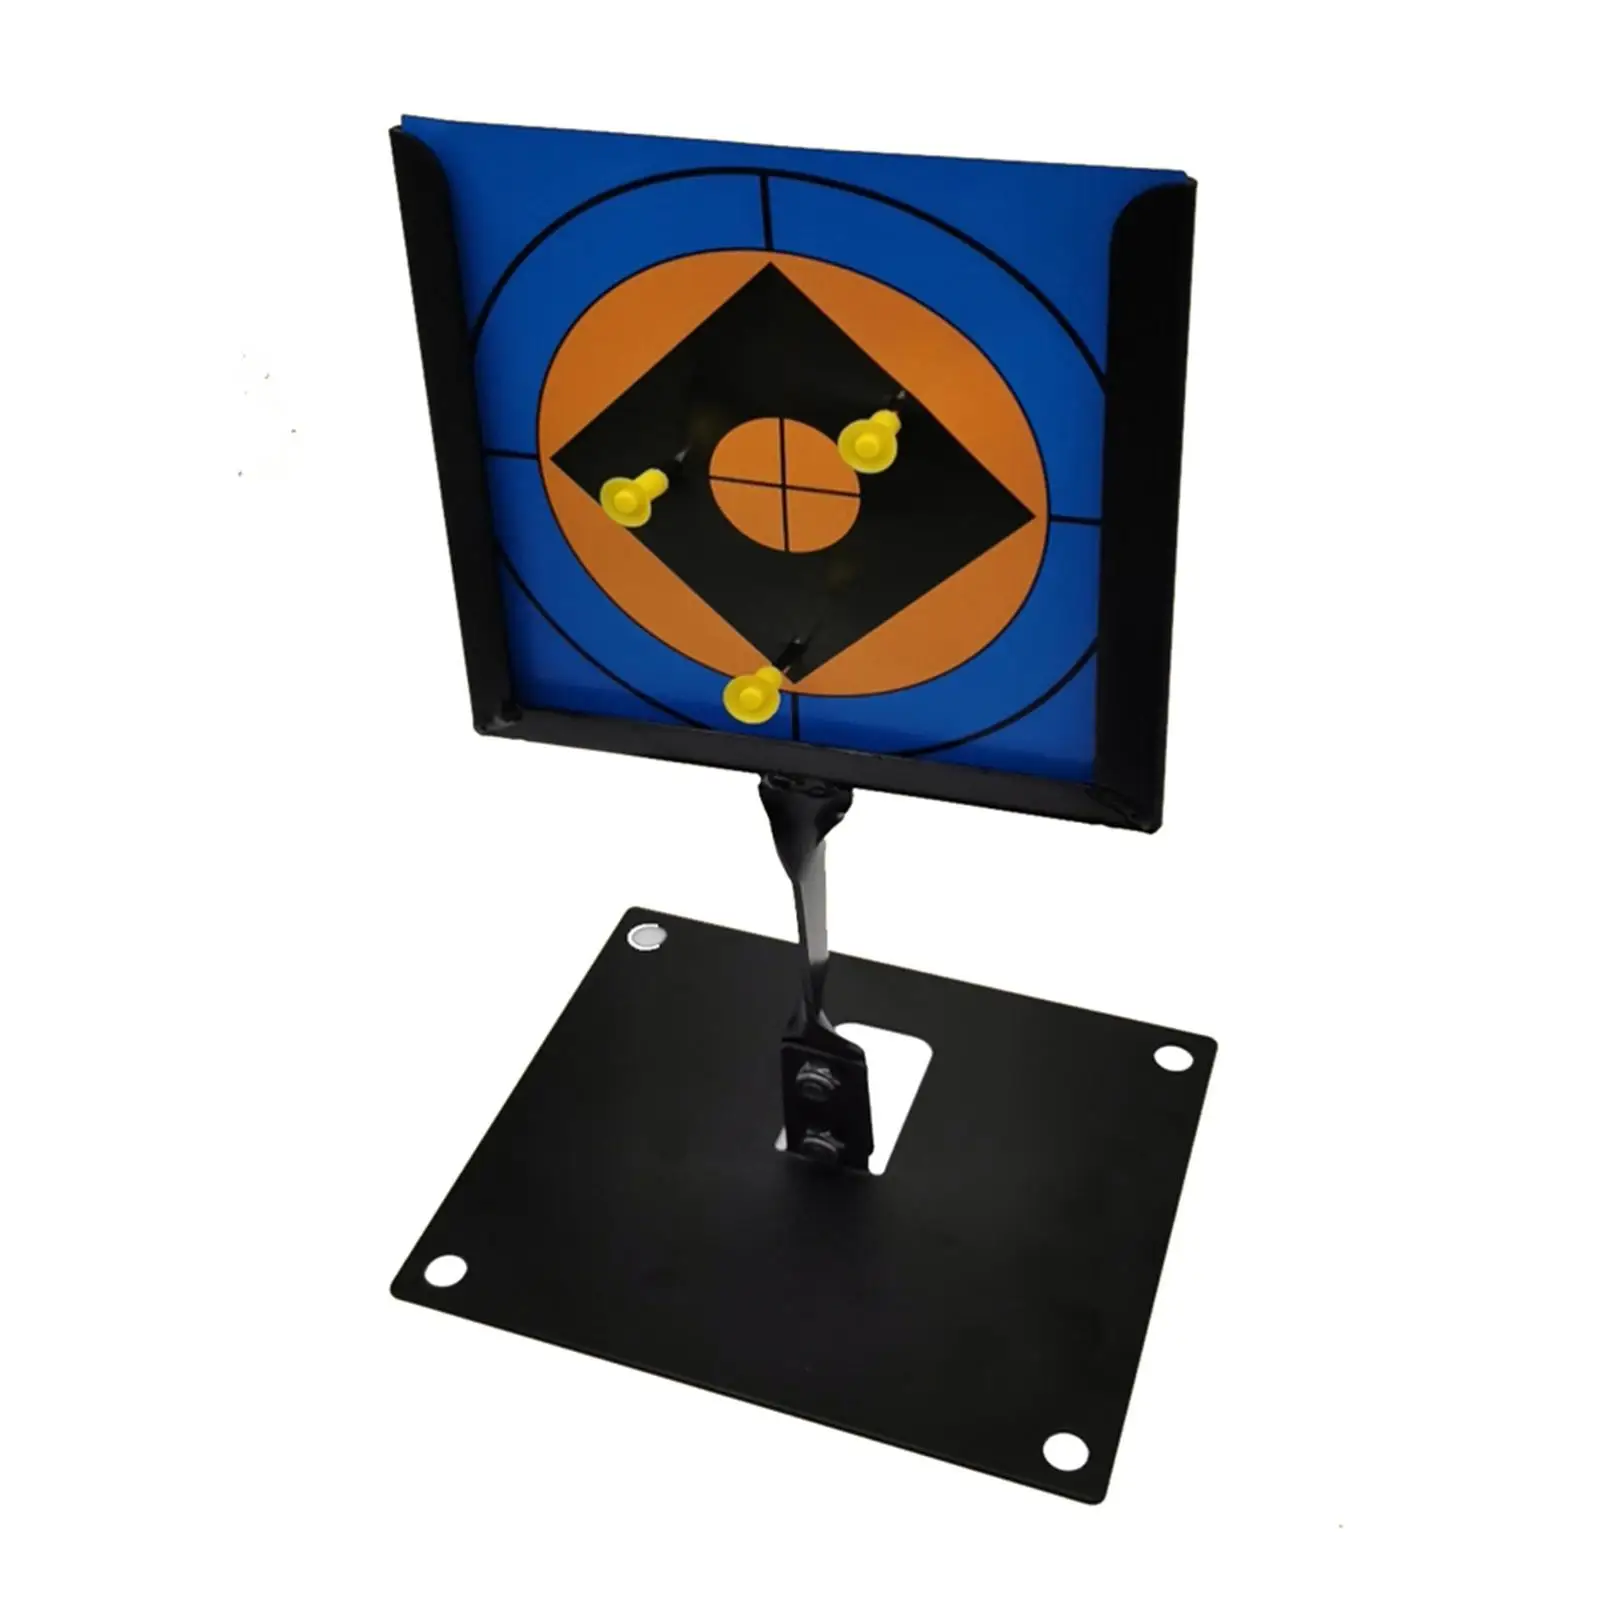 Target Stand Holder Shooting with 14cm Paper Archery Target Hunting Support